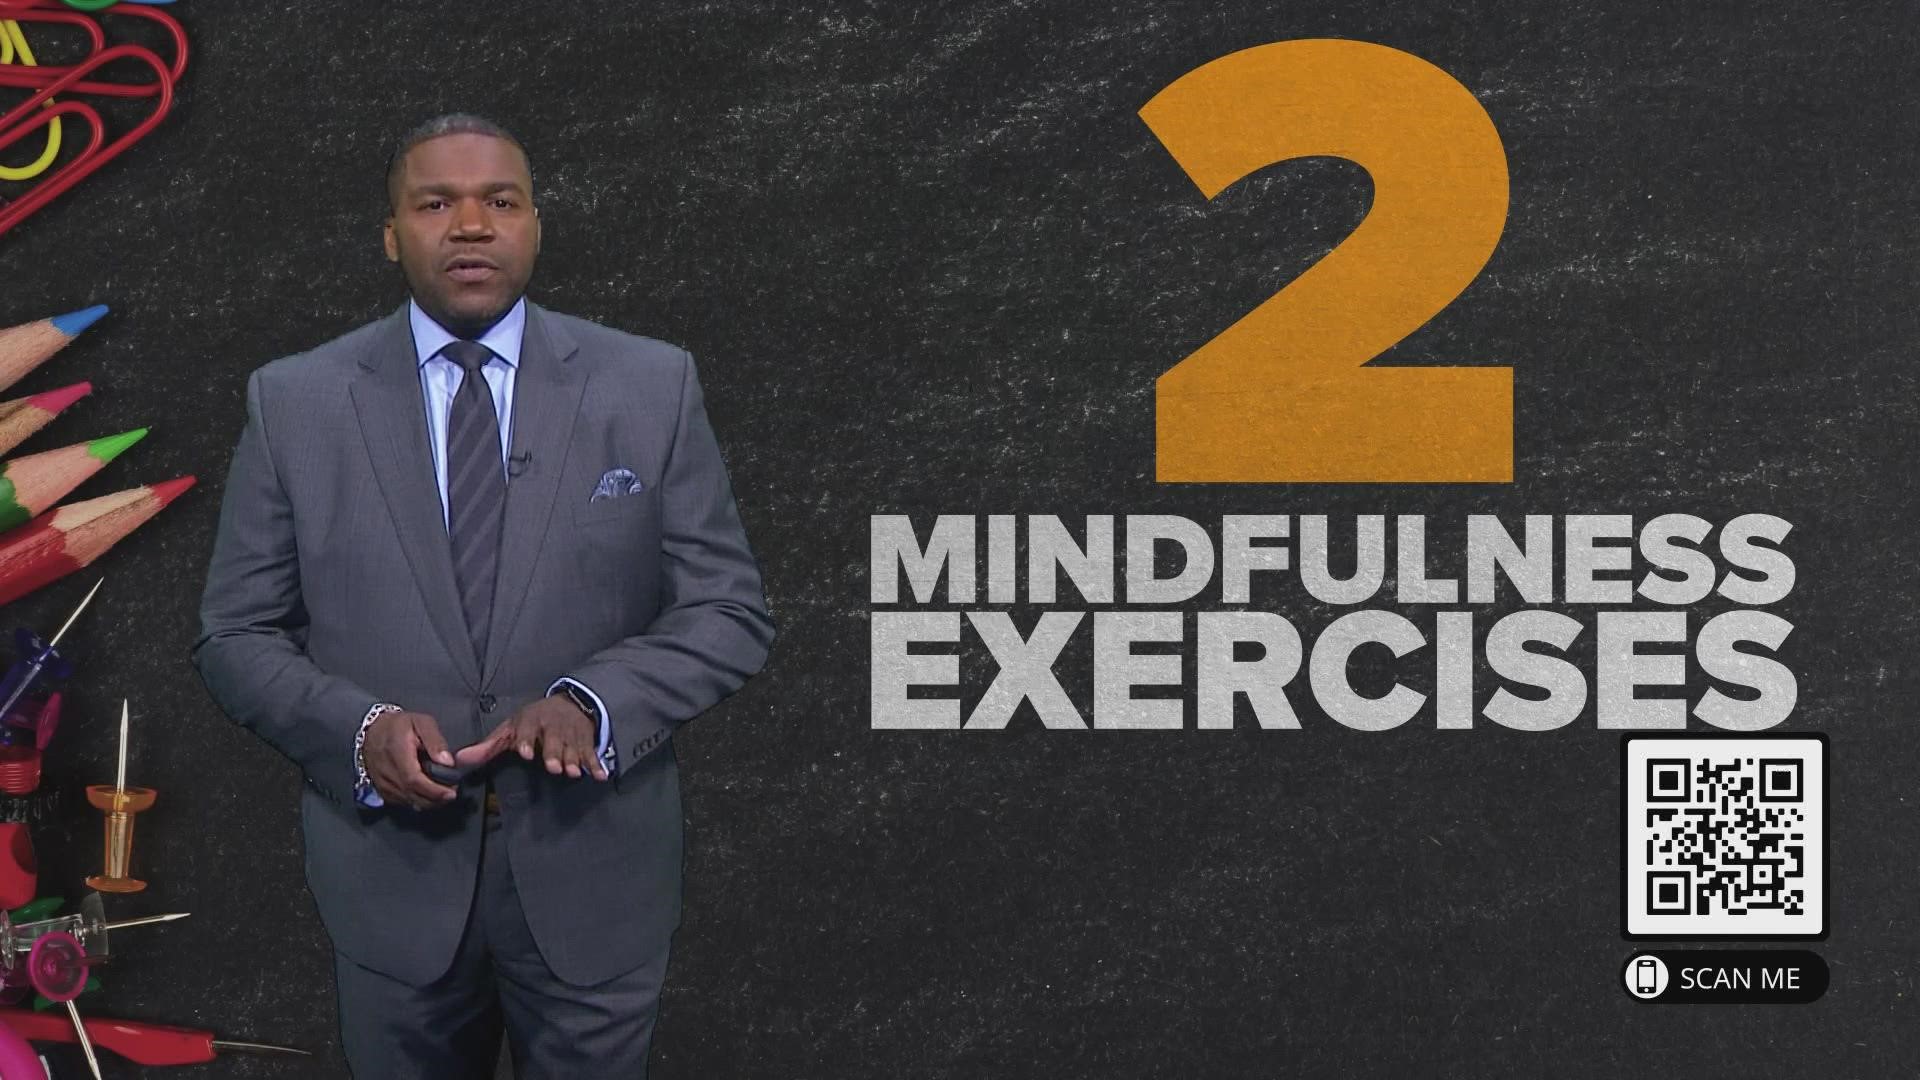 In today's Mindset Minute, we look at two mindfulness exercises you can have your student practice.